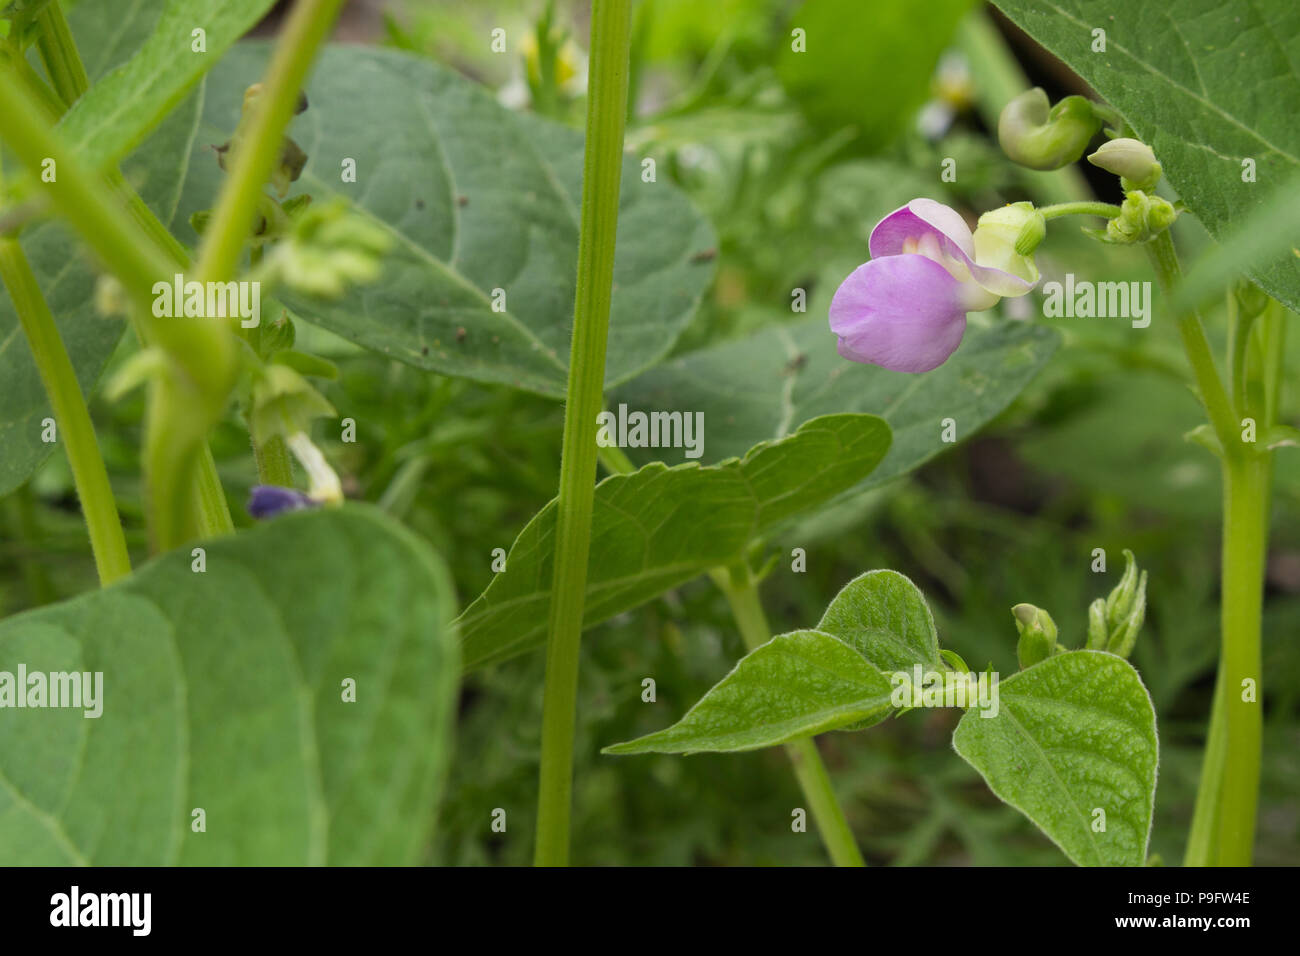 Violet wax bean bloom among bean plants  growing in a raised bed garden Stock Photo